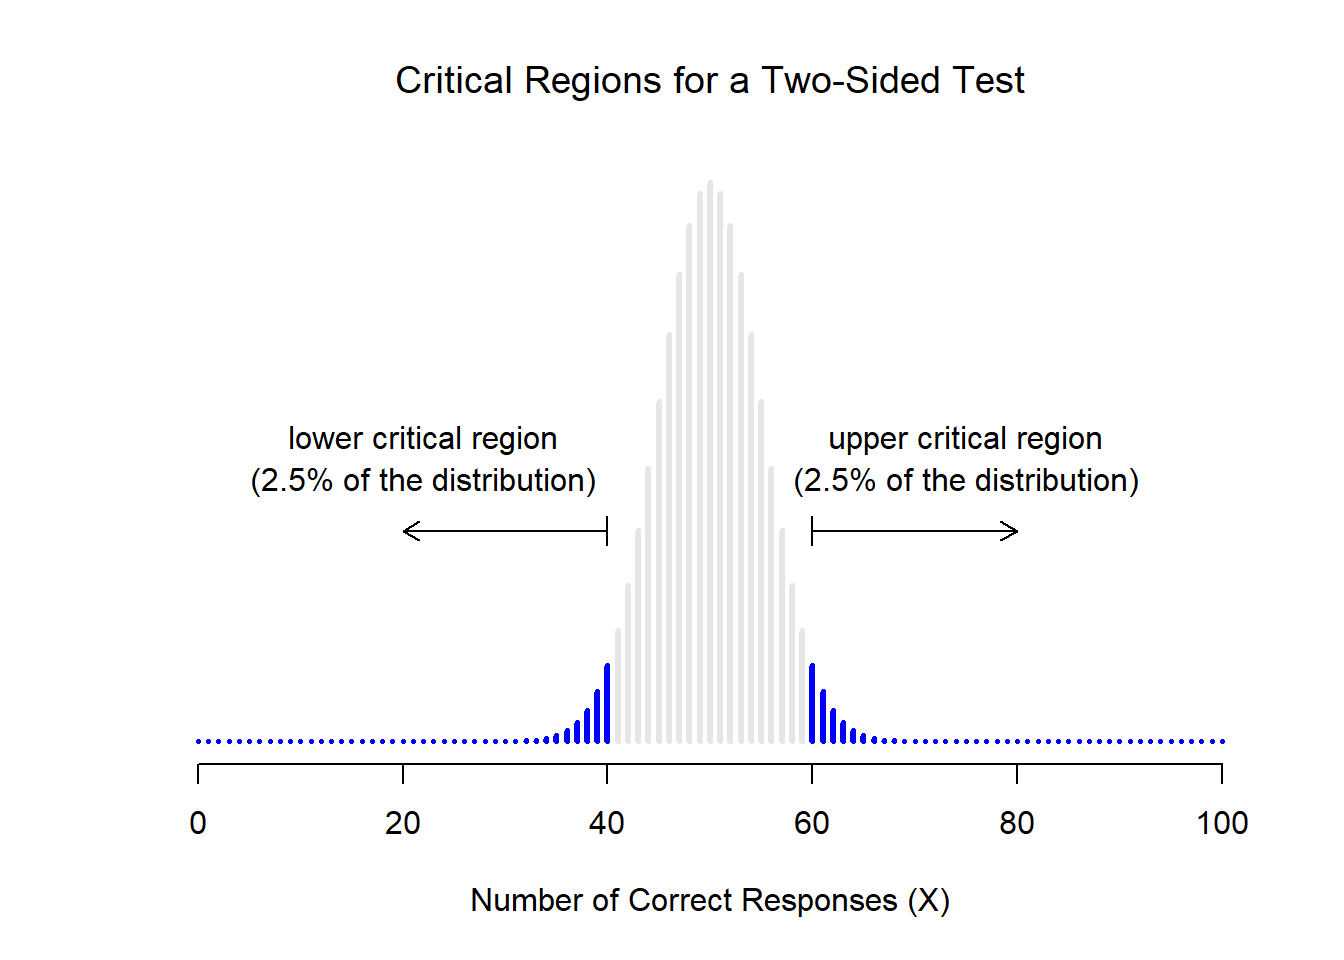 how relevant learning hypothesis testing is